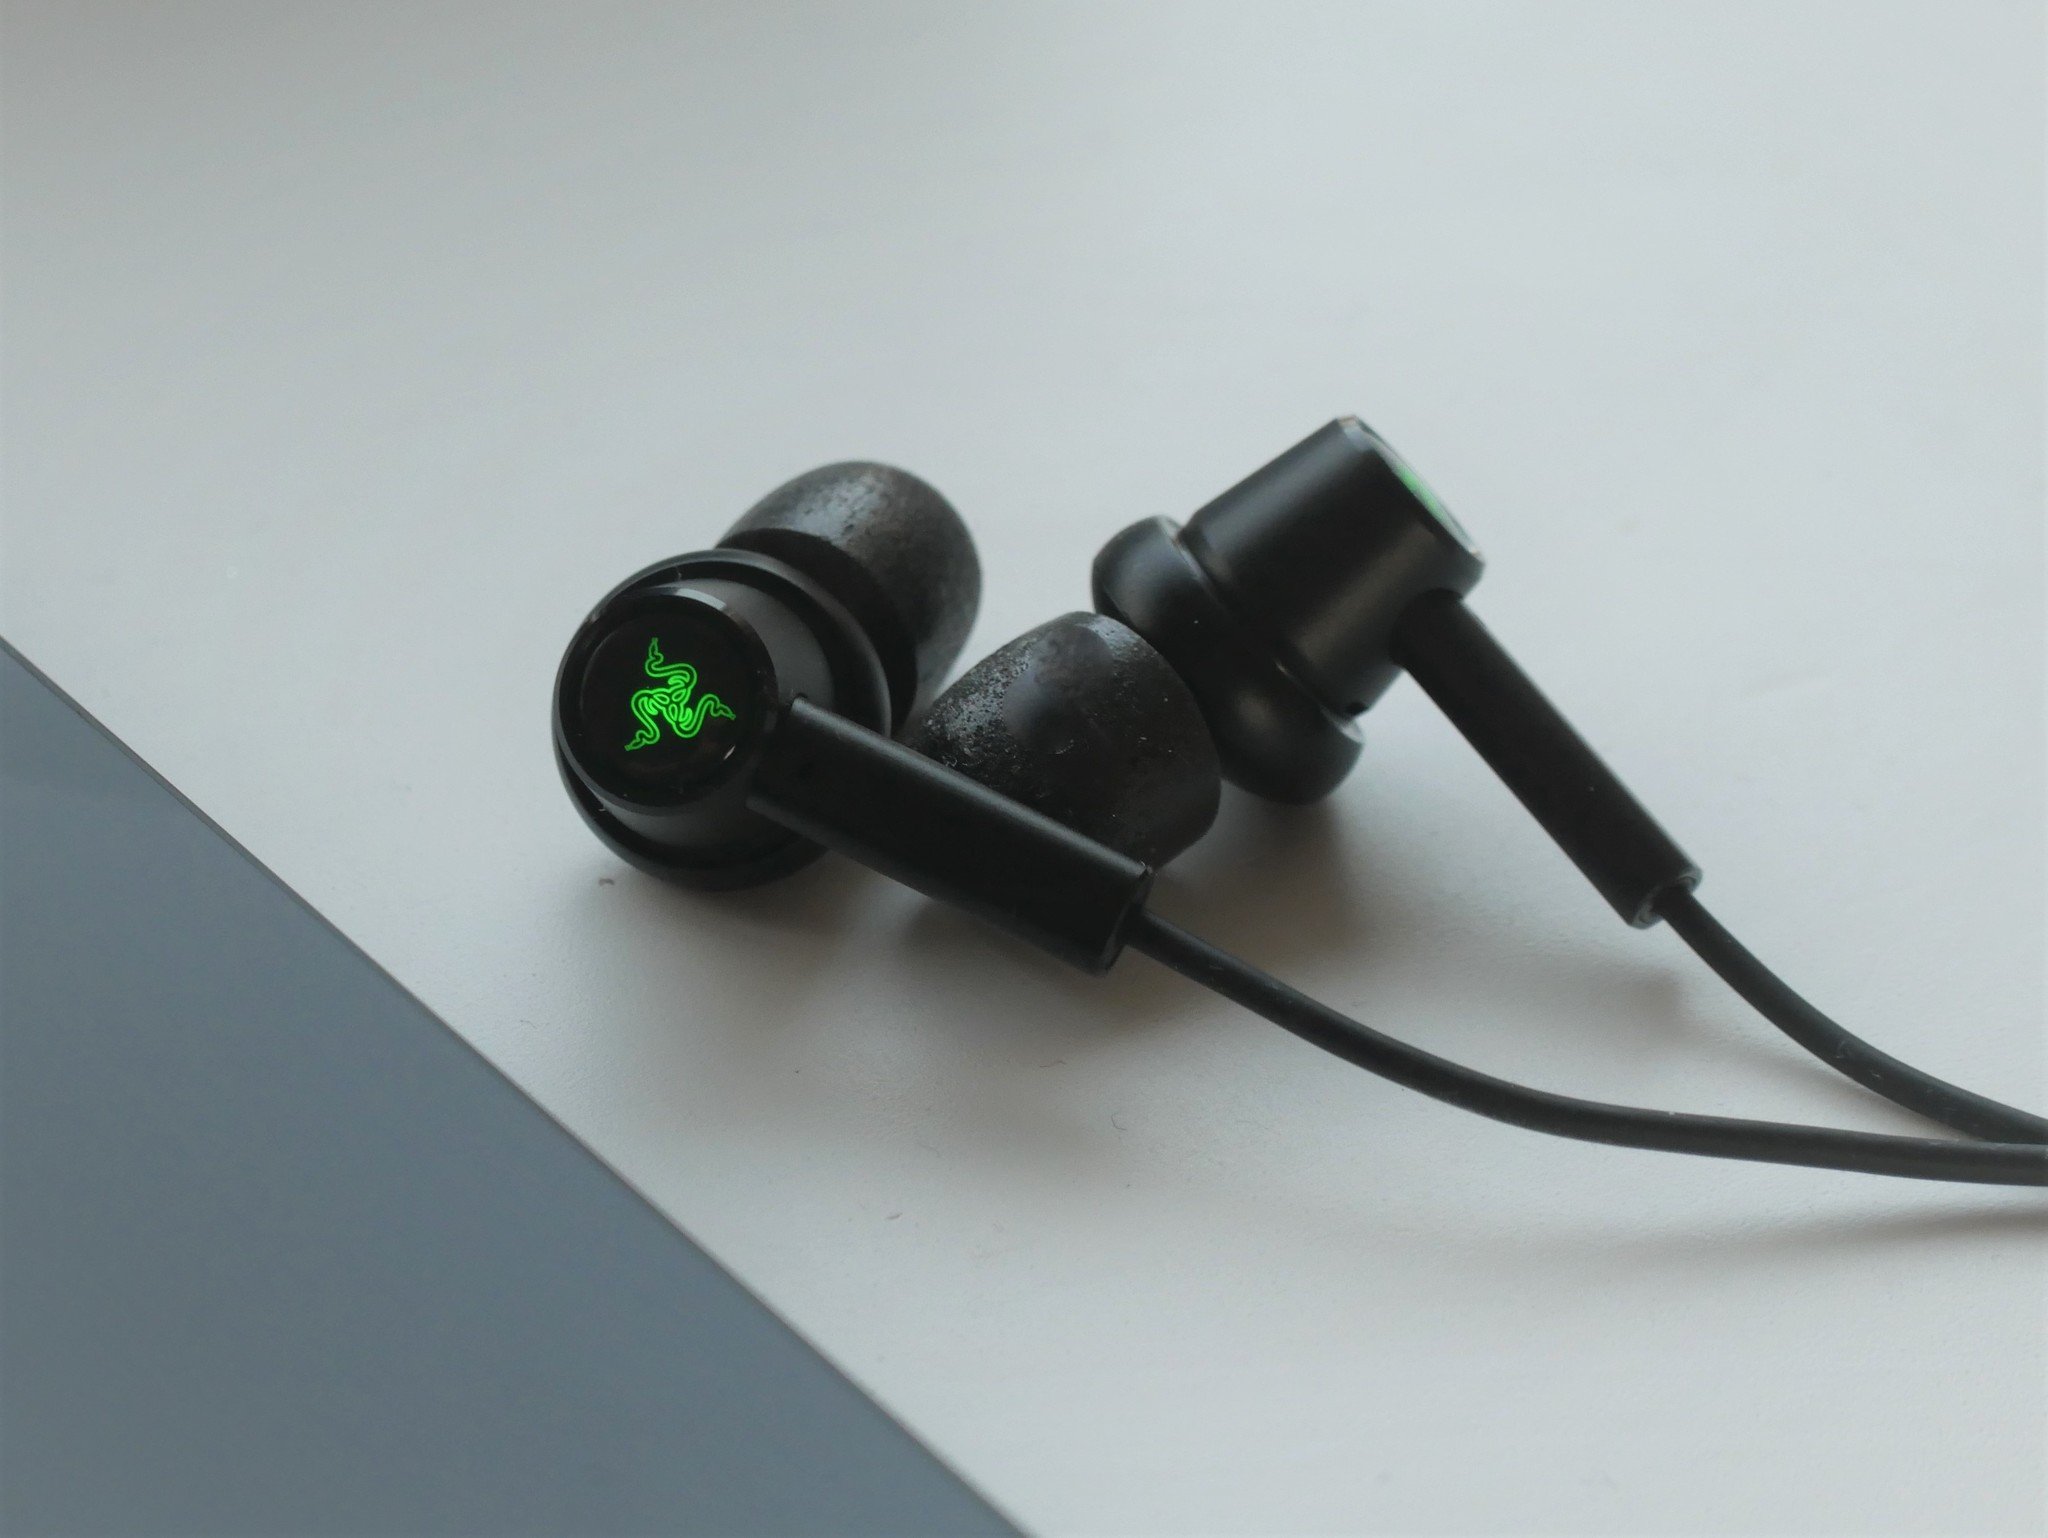 Razer Hammerhead Usb C Anc Review Superb Sound With Nice Noise Canceling Tech Windows Central